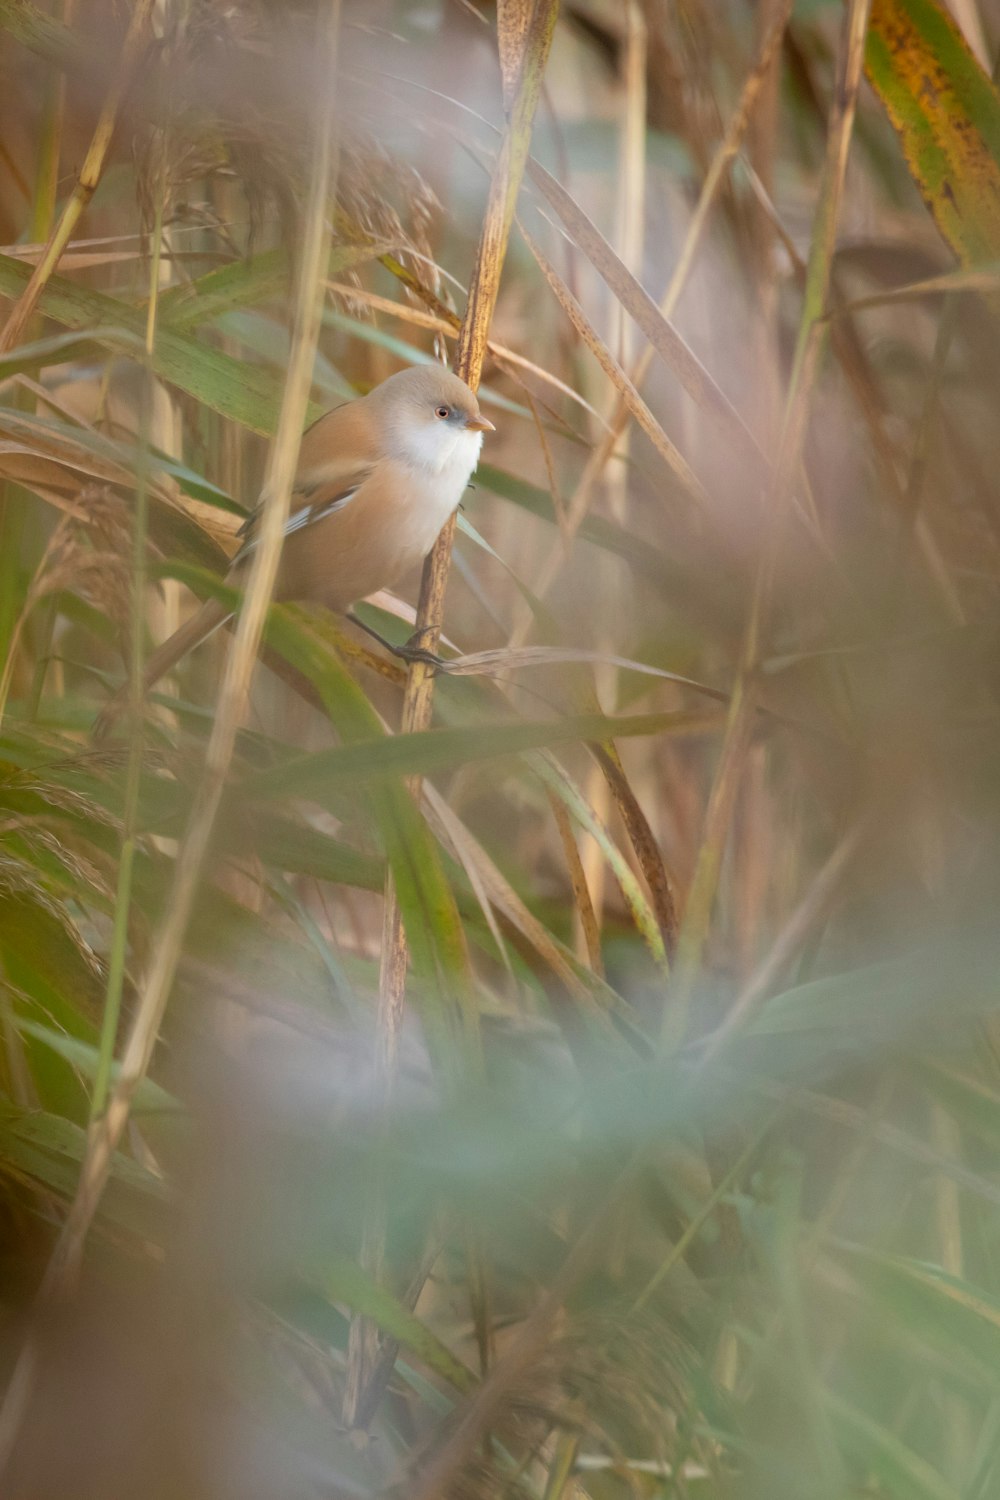 brown and white bird on green grass during daytime